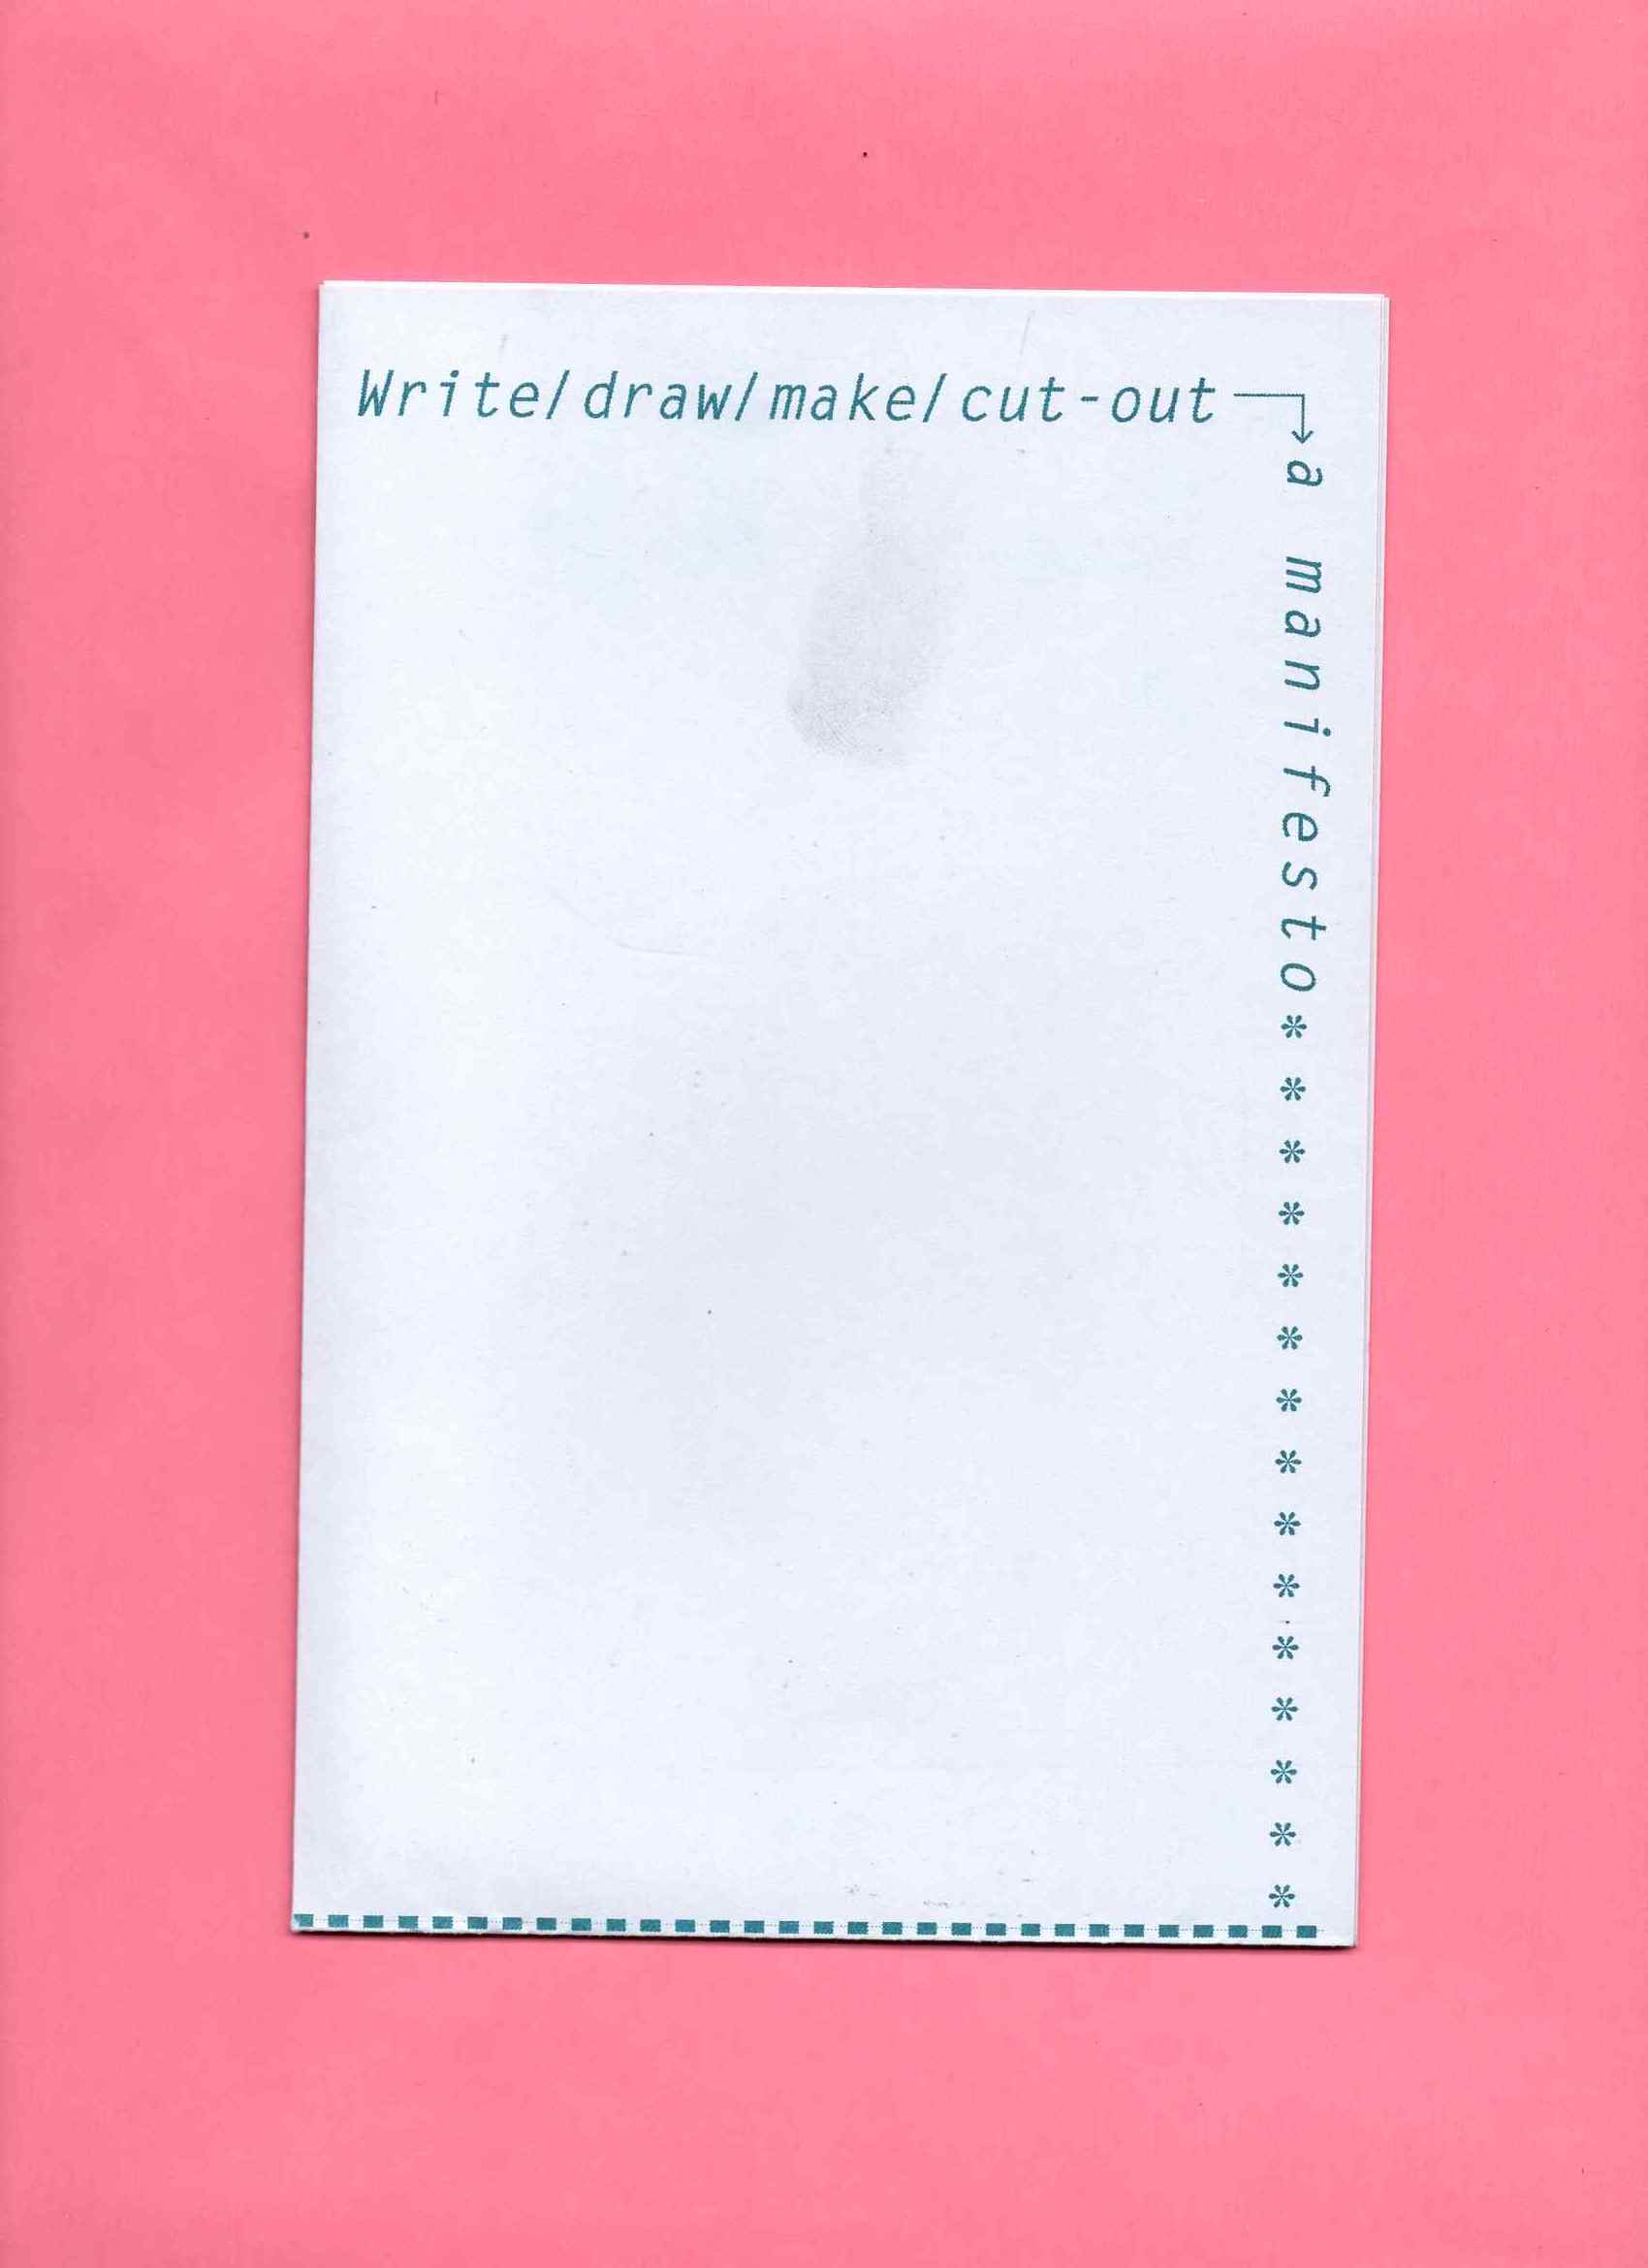 A blank white page with teal text printed around its perimeter